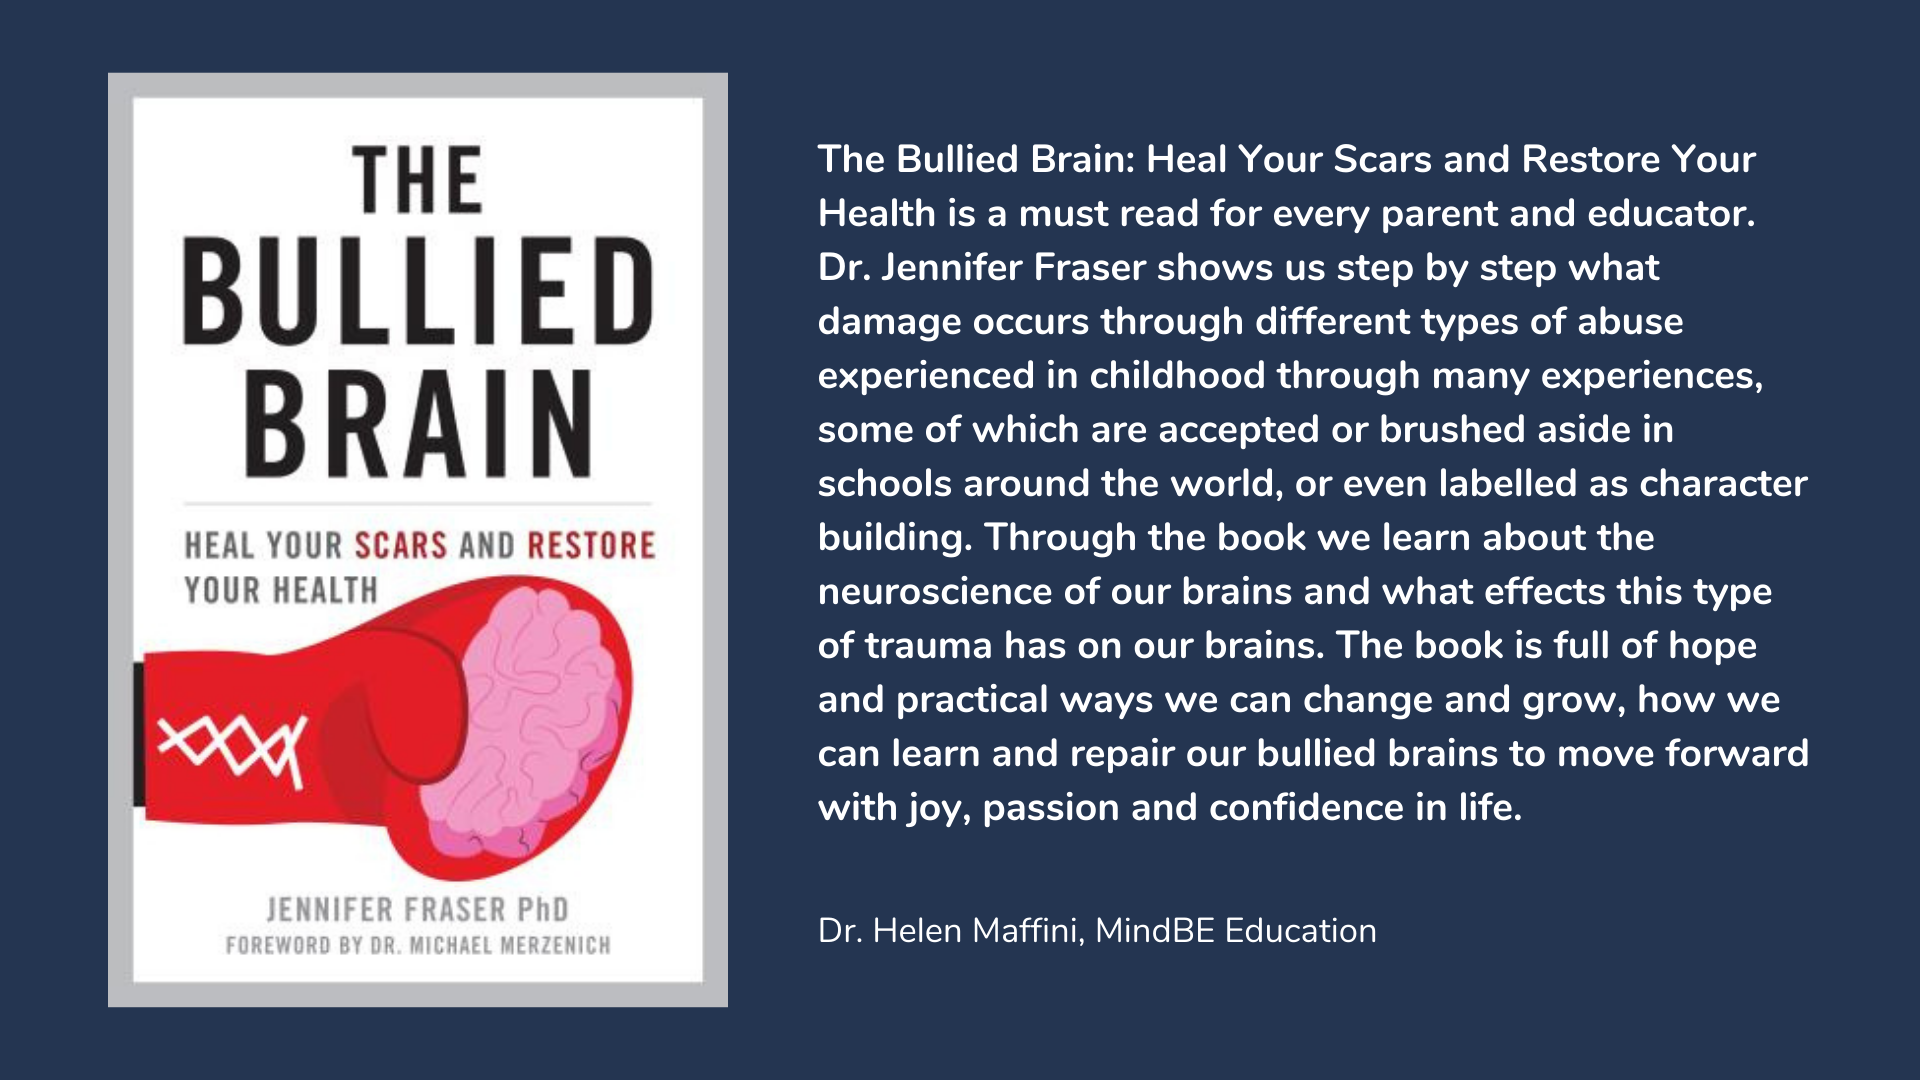 The Bullied Brain: Heal Your Scars and Restore Your Health, book cover and description.